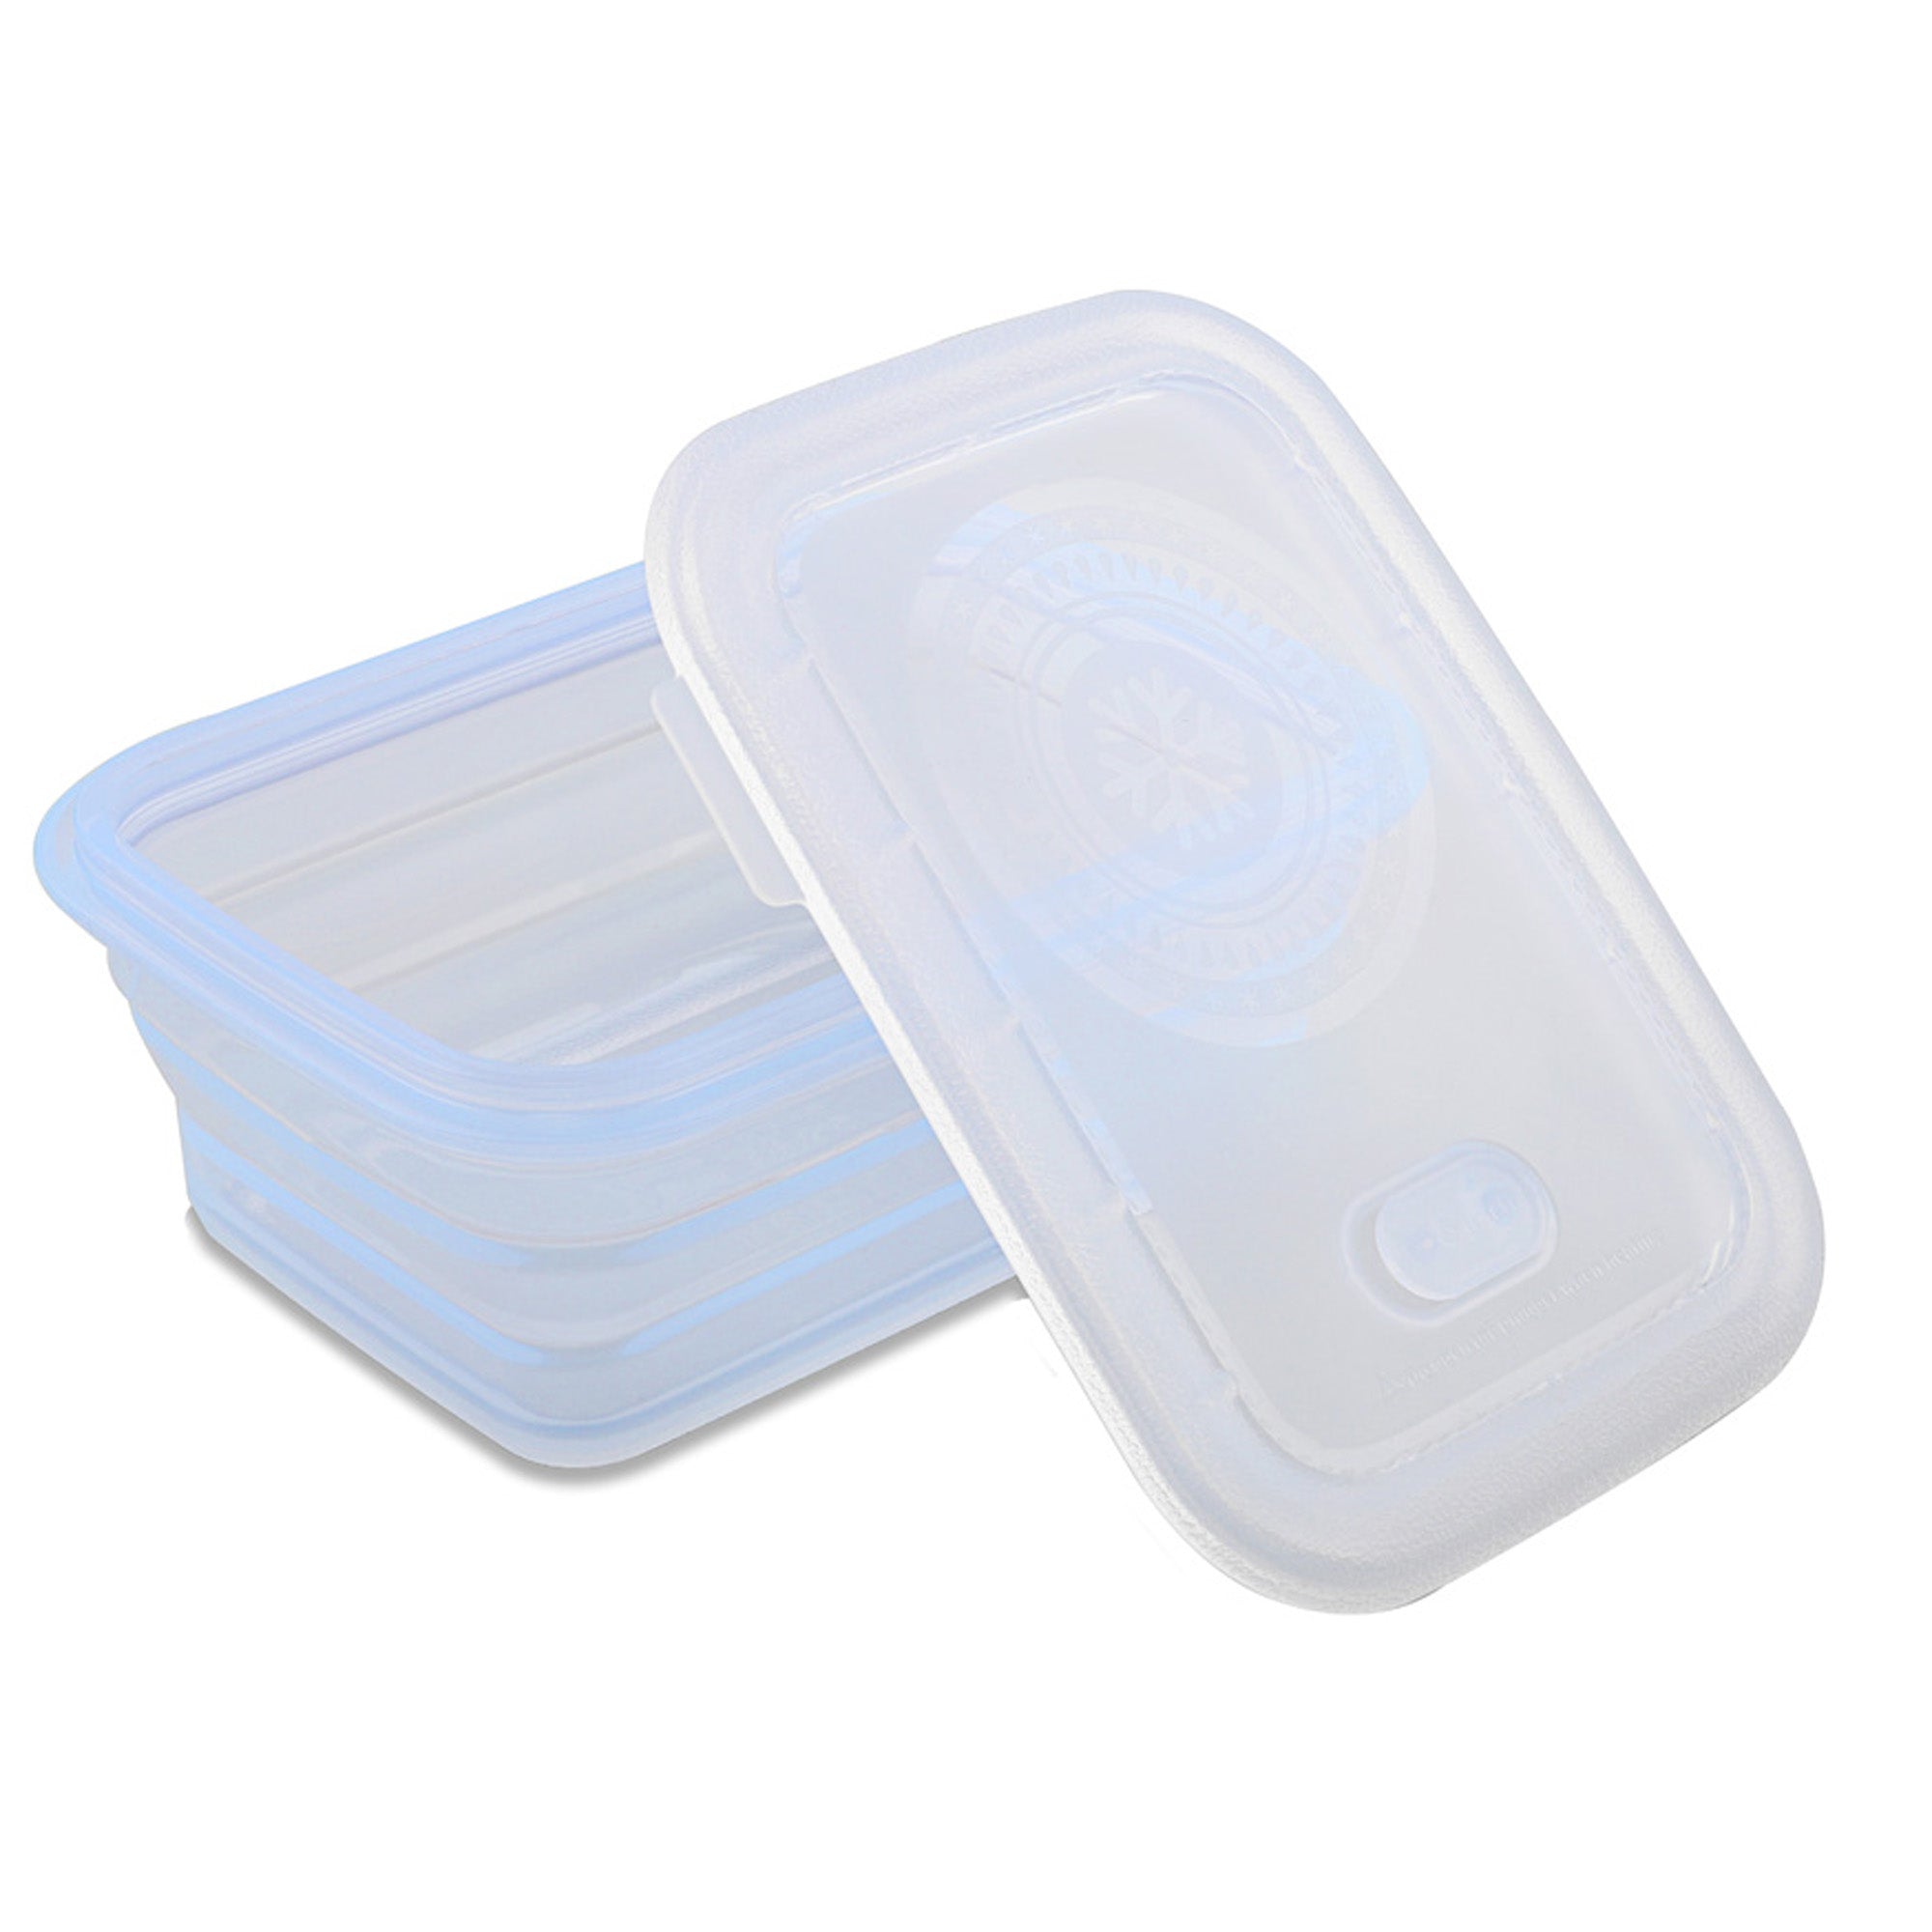 Minimal Collapsible Silicone Food Storage Container Set of 6 - 1160 ml - Clear